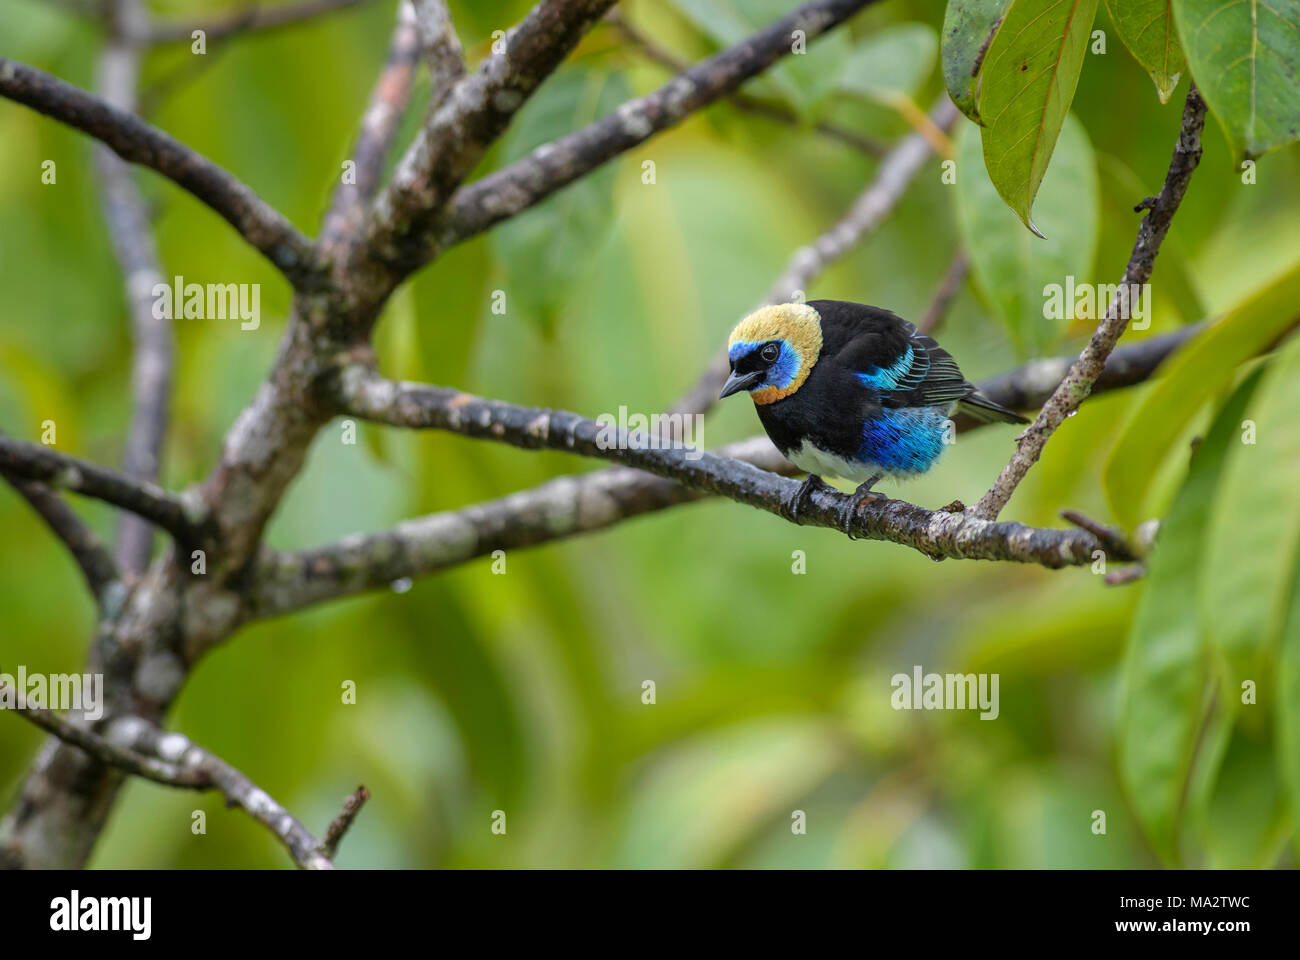 Golden-hooded Tanager - Tangara larvata, beautiful colorful perching bird with golden head from Costa Rica forest. Stock Photo